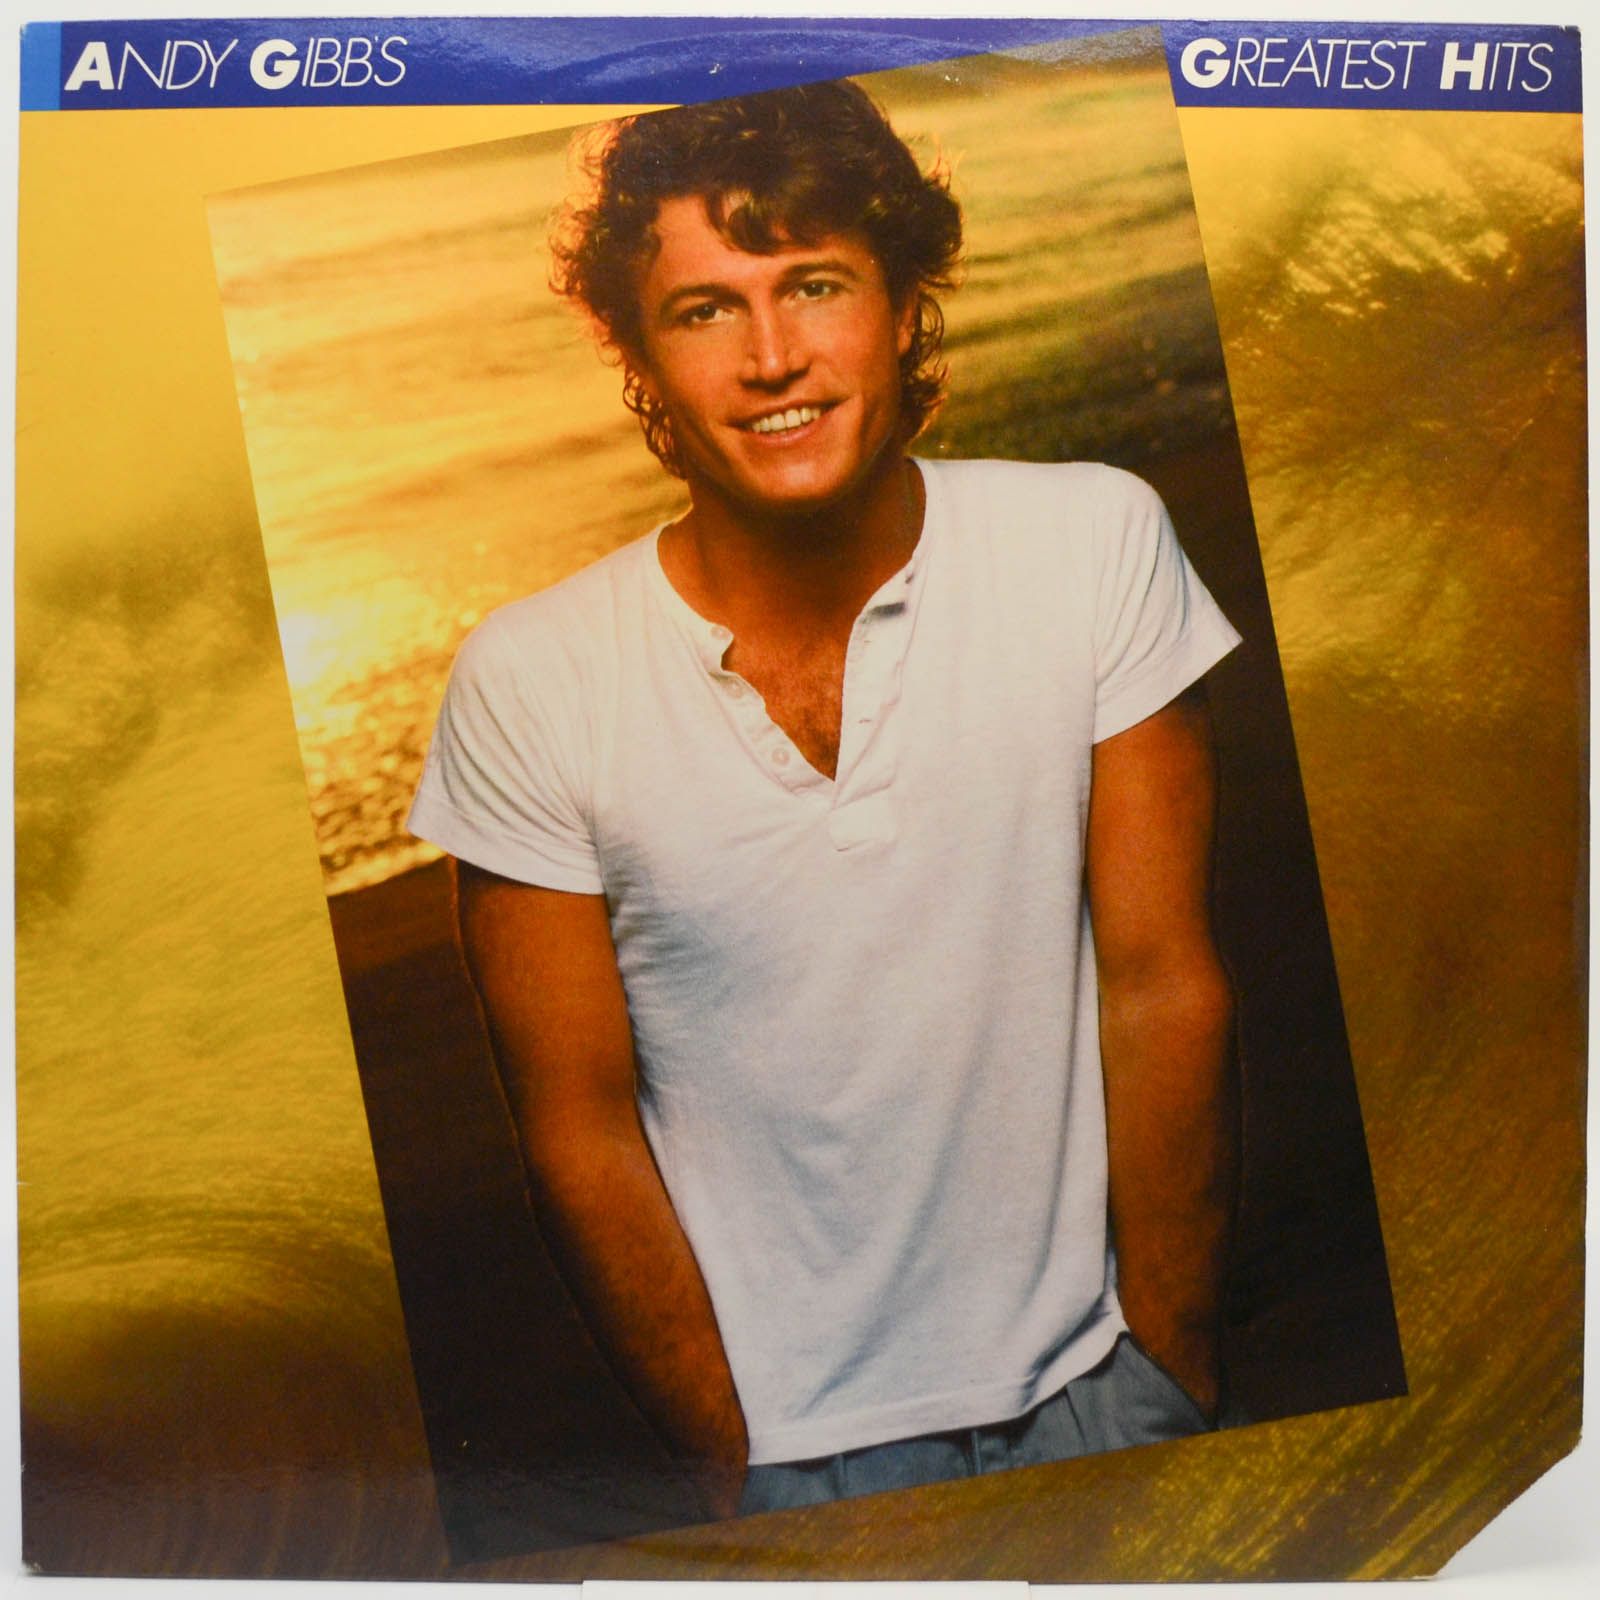 Andy Gibb — Andy Gibb's Greatest Hits (USA), 1980